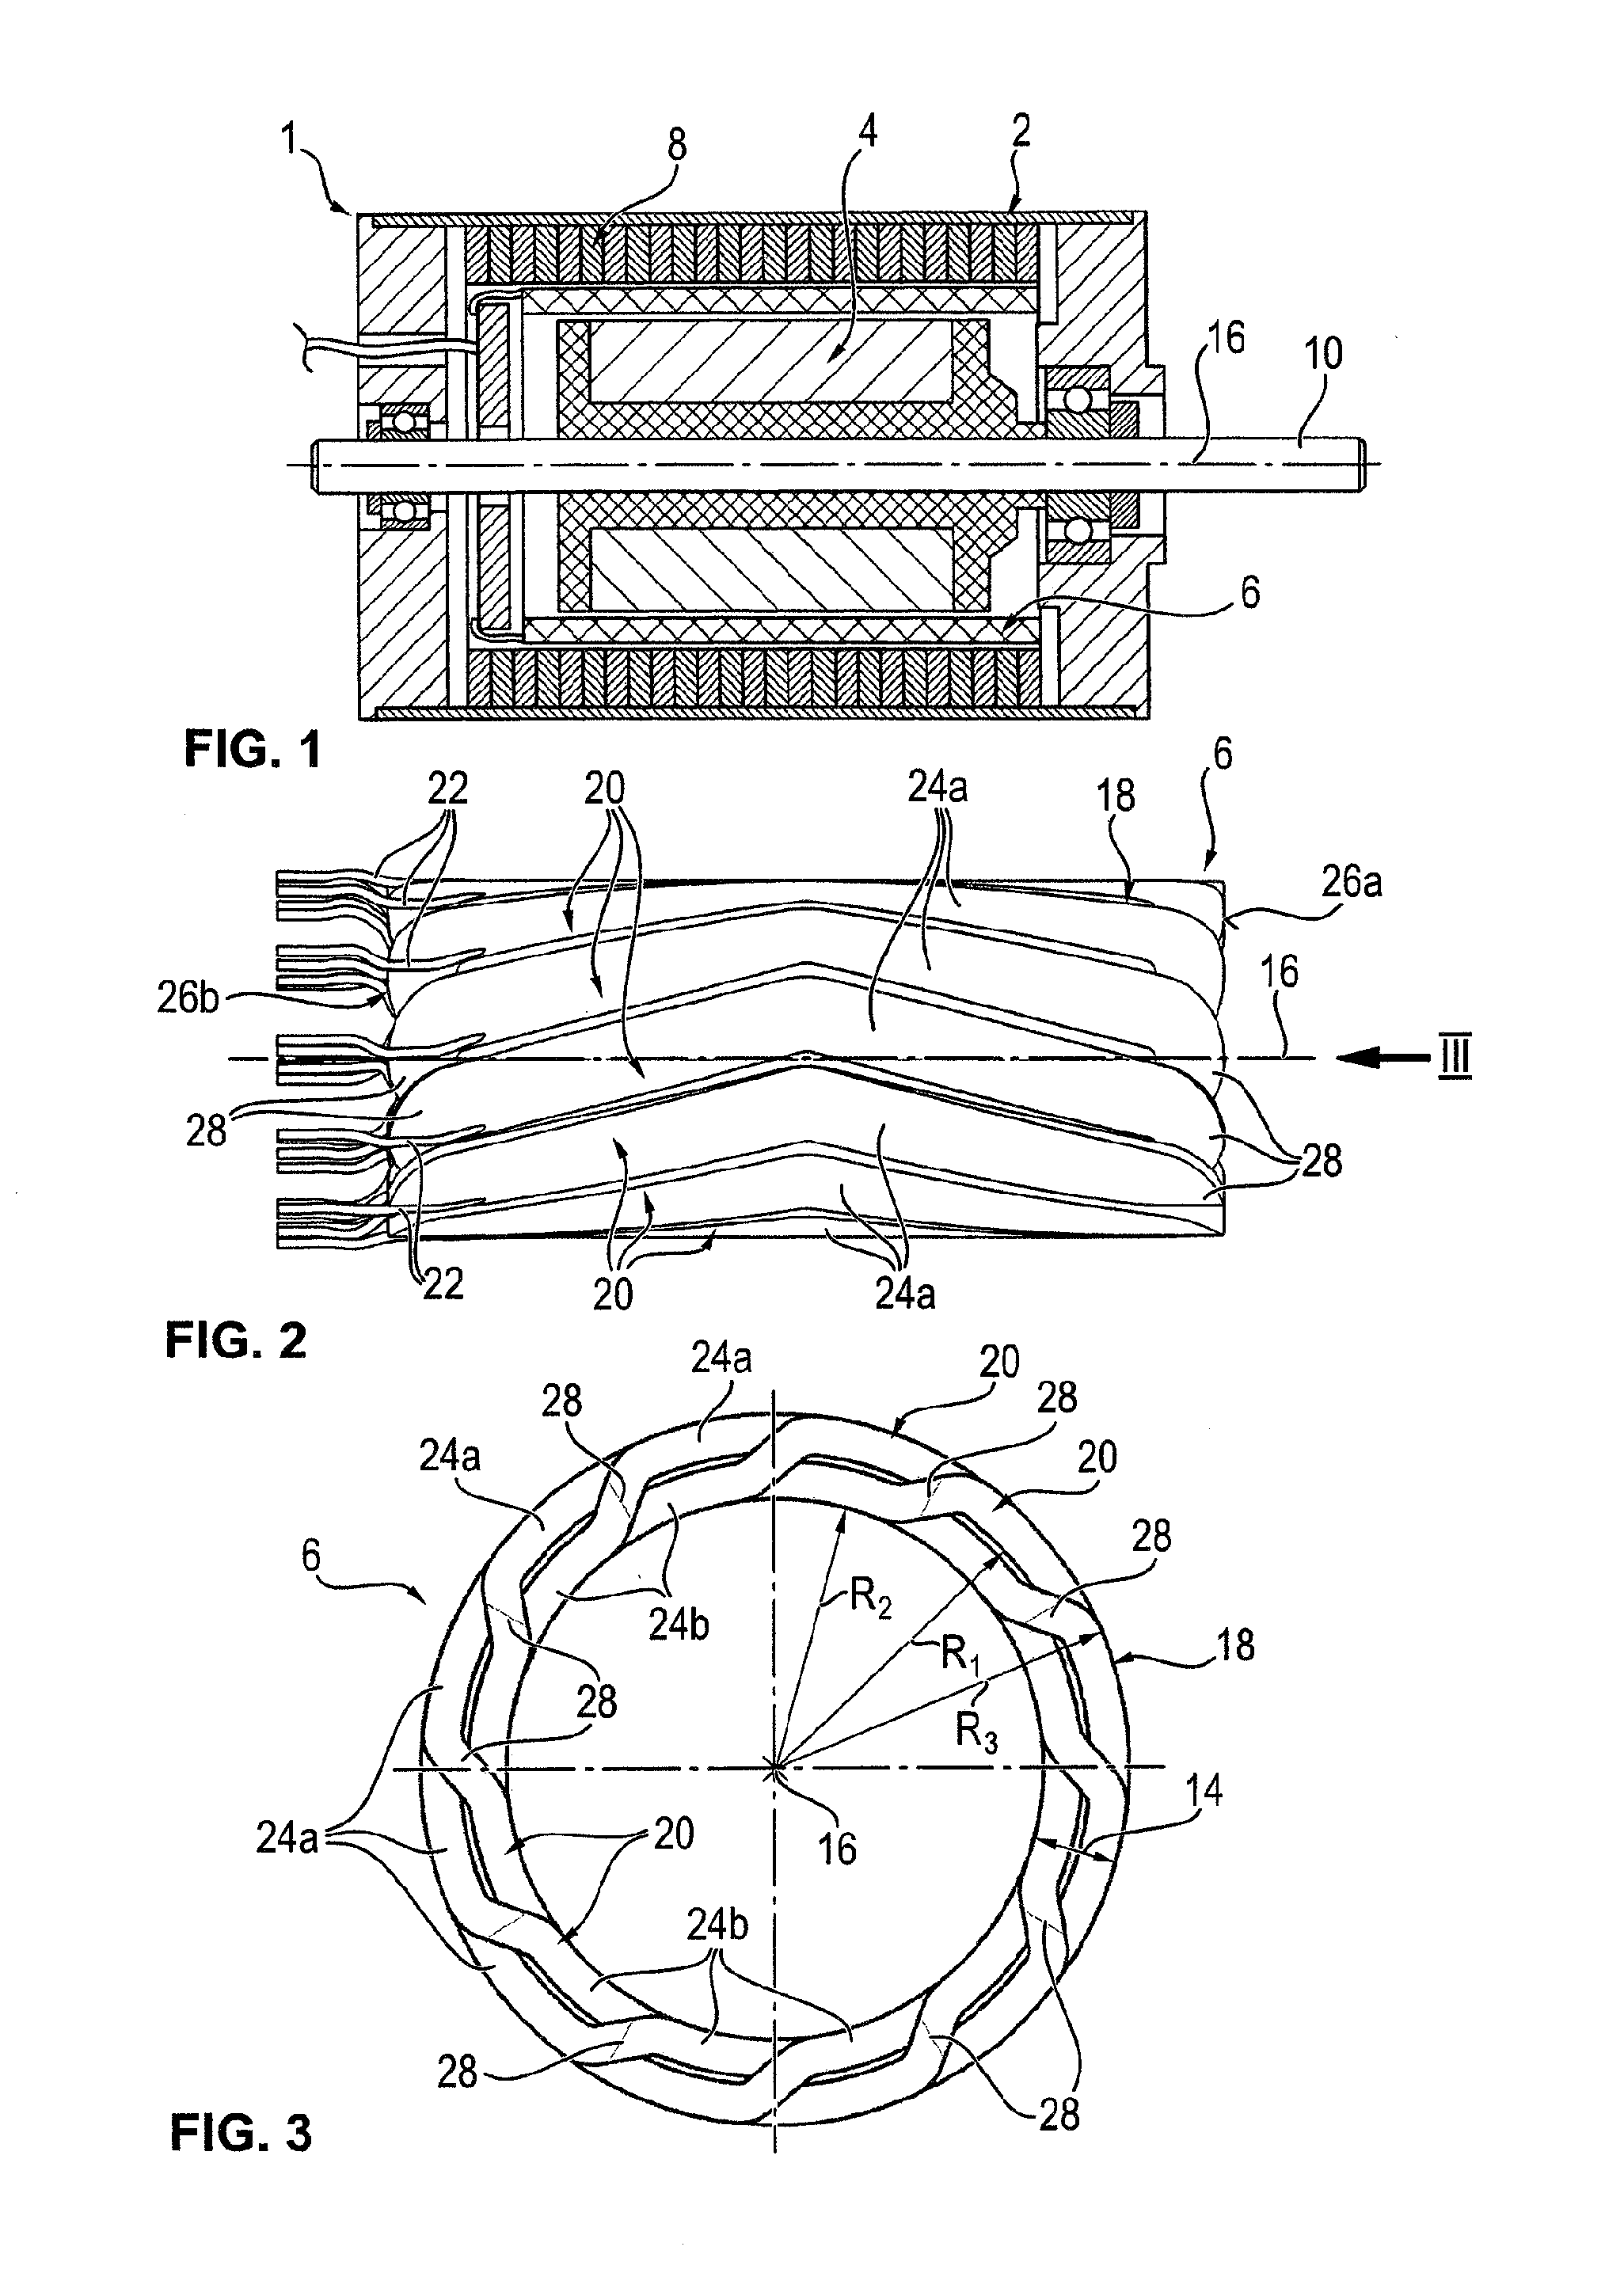 Preformed Coil to Produce a Self-Supporting Air Gap Winding, in Particular Oblique Winding of a Small Electrical Motor